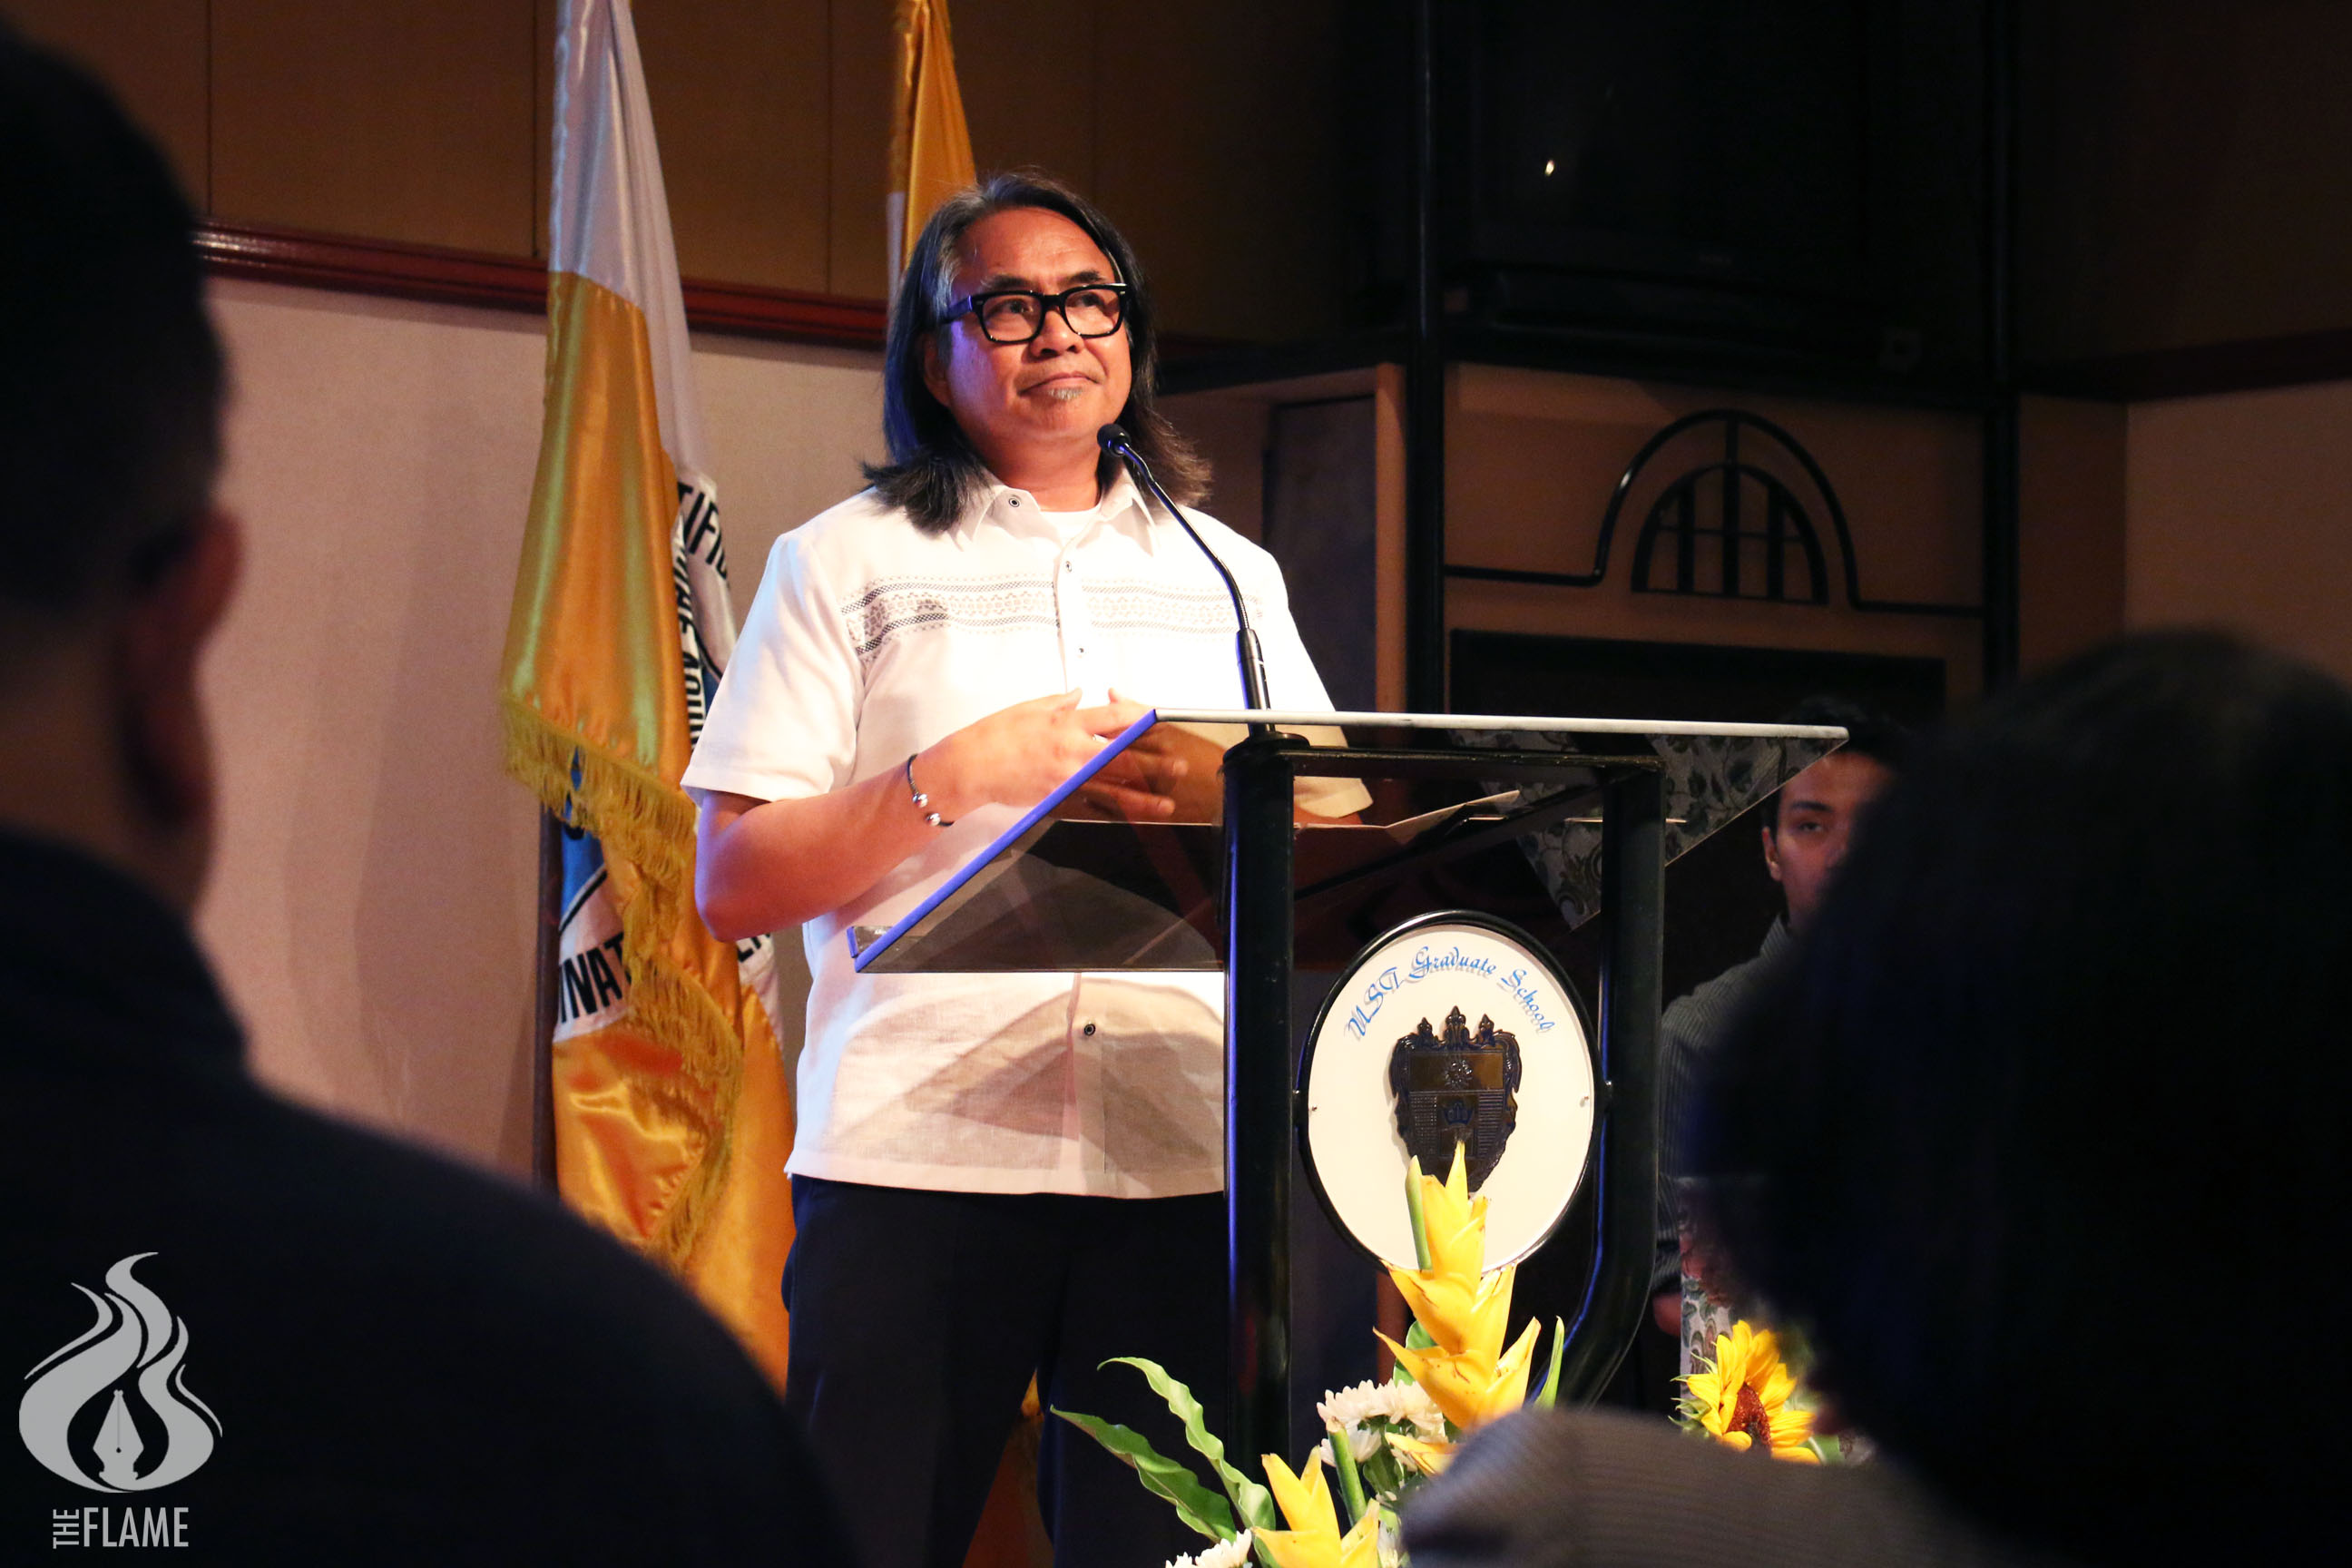 Poetry connects, educates people, says Fil-Am poet